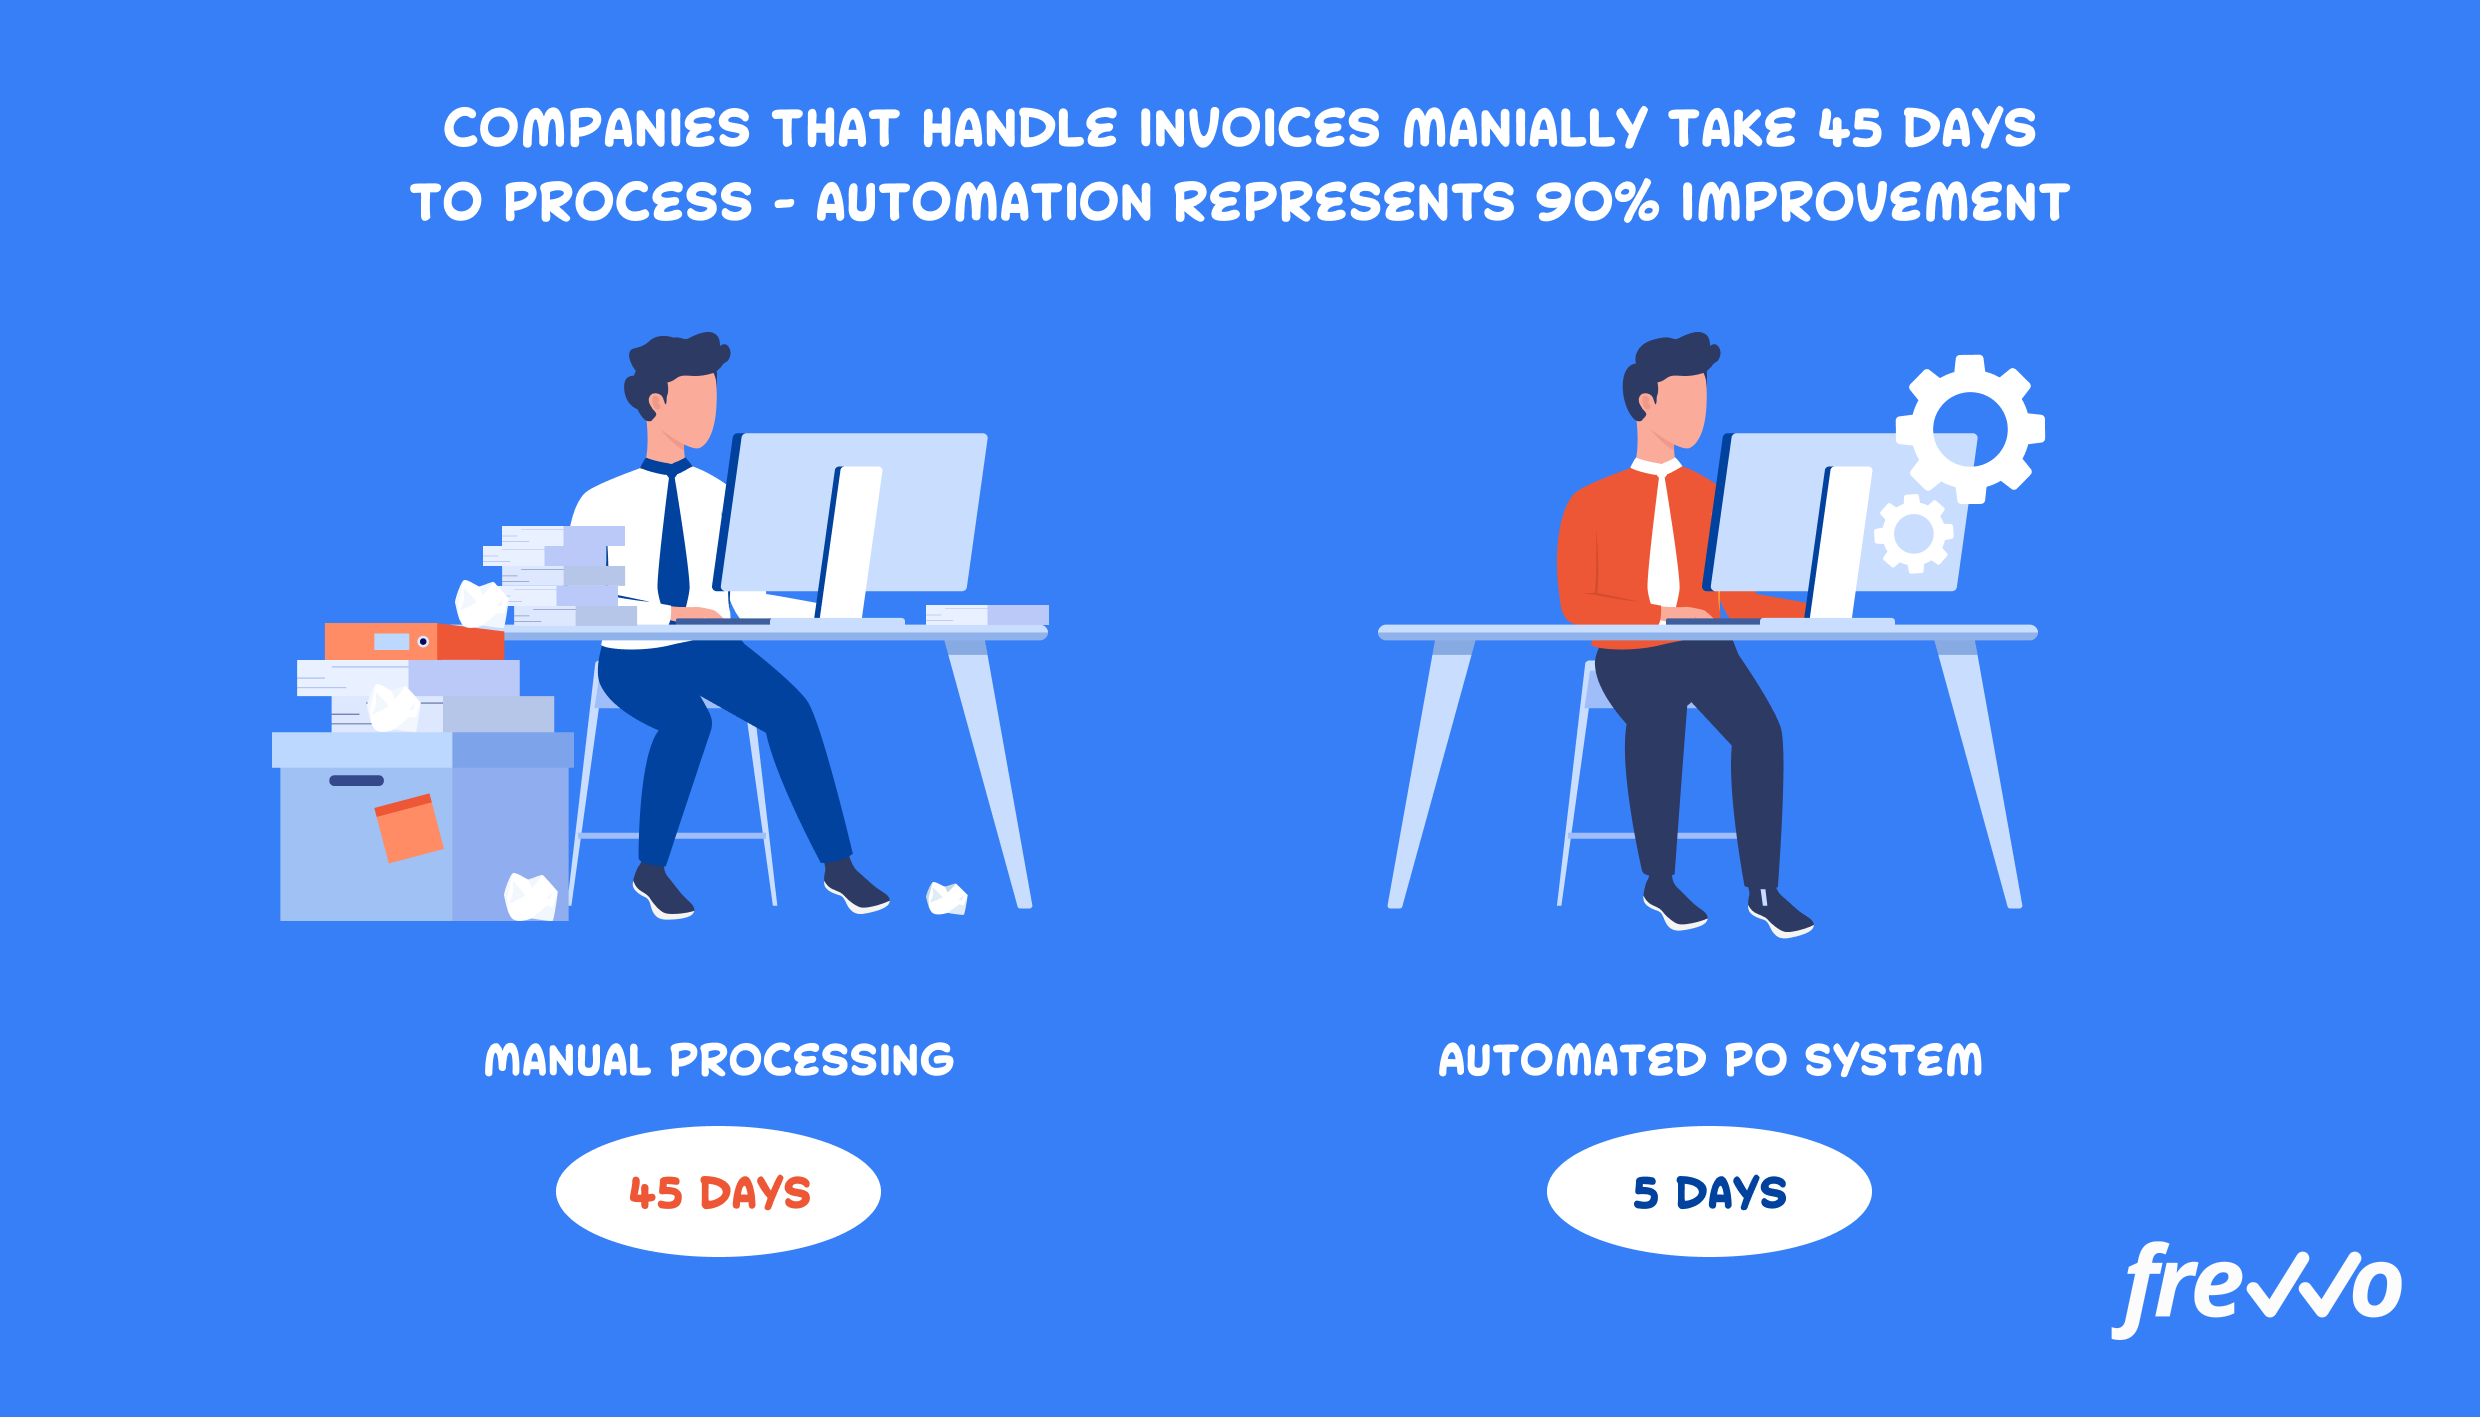 Companies that handle invoices manually take 45 days to process